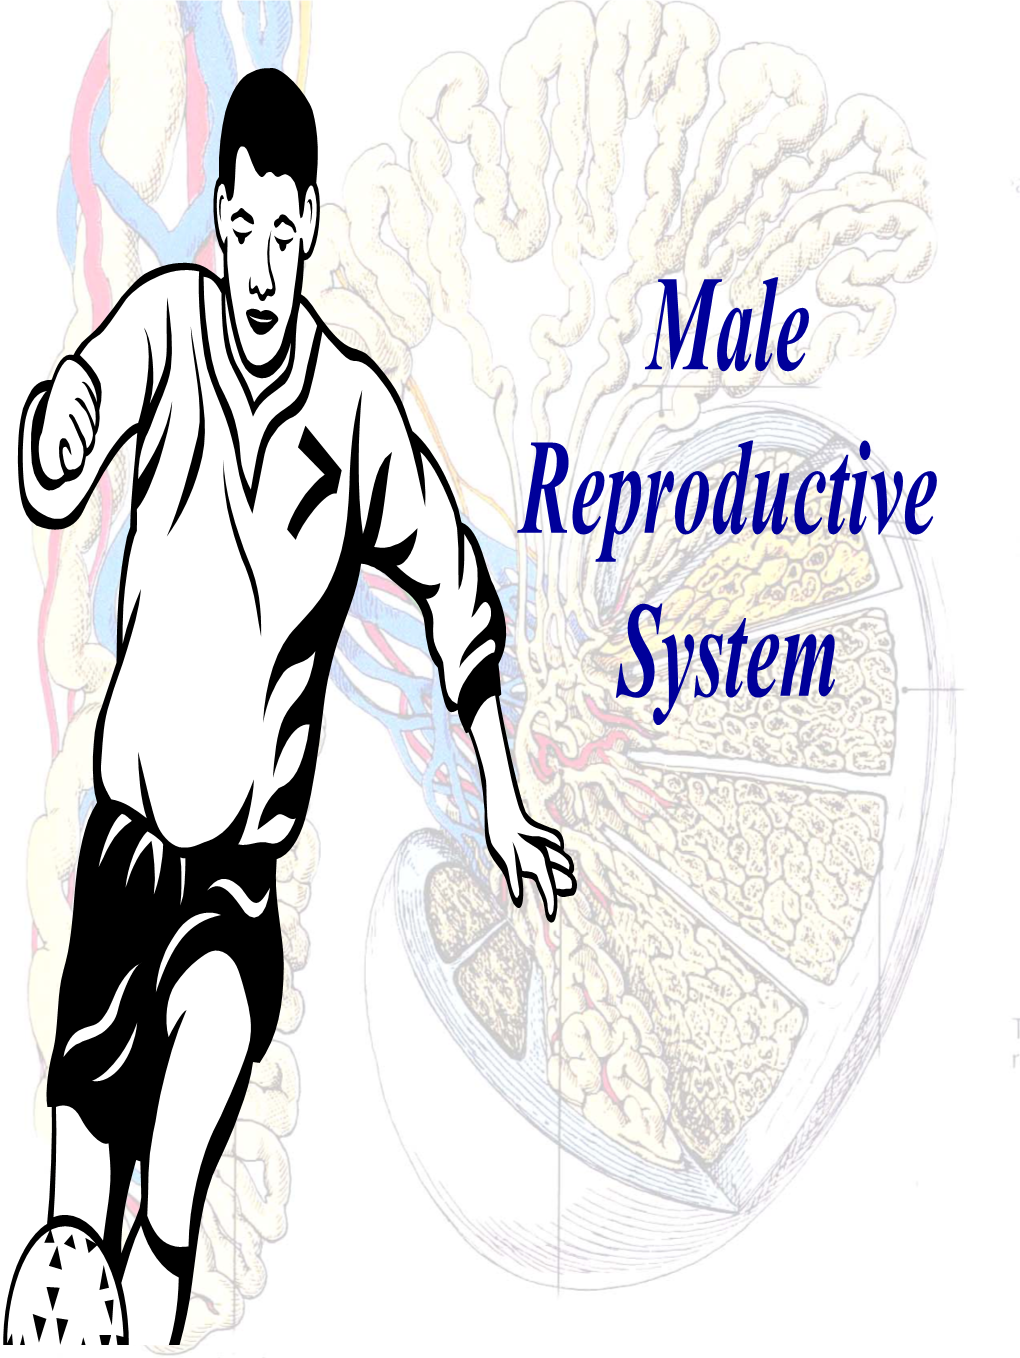 Male Reproductive System Constitution of Male Reproductive System